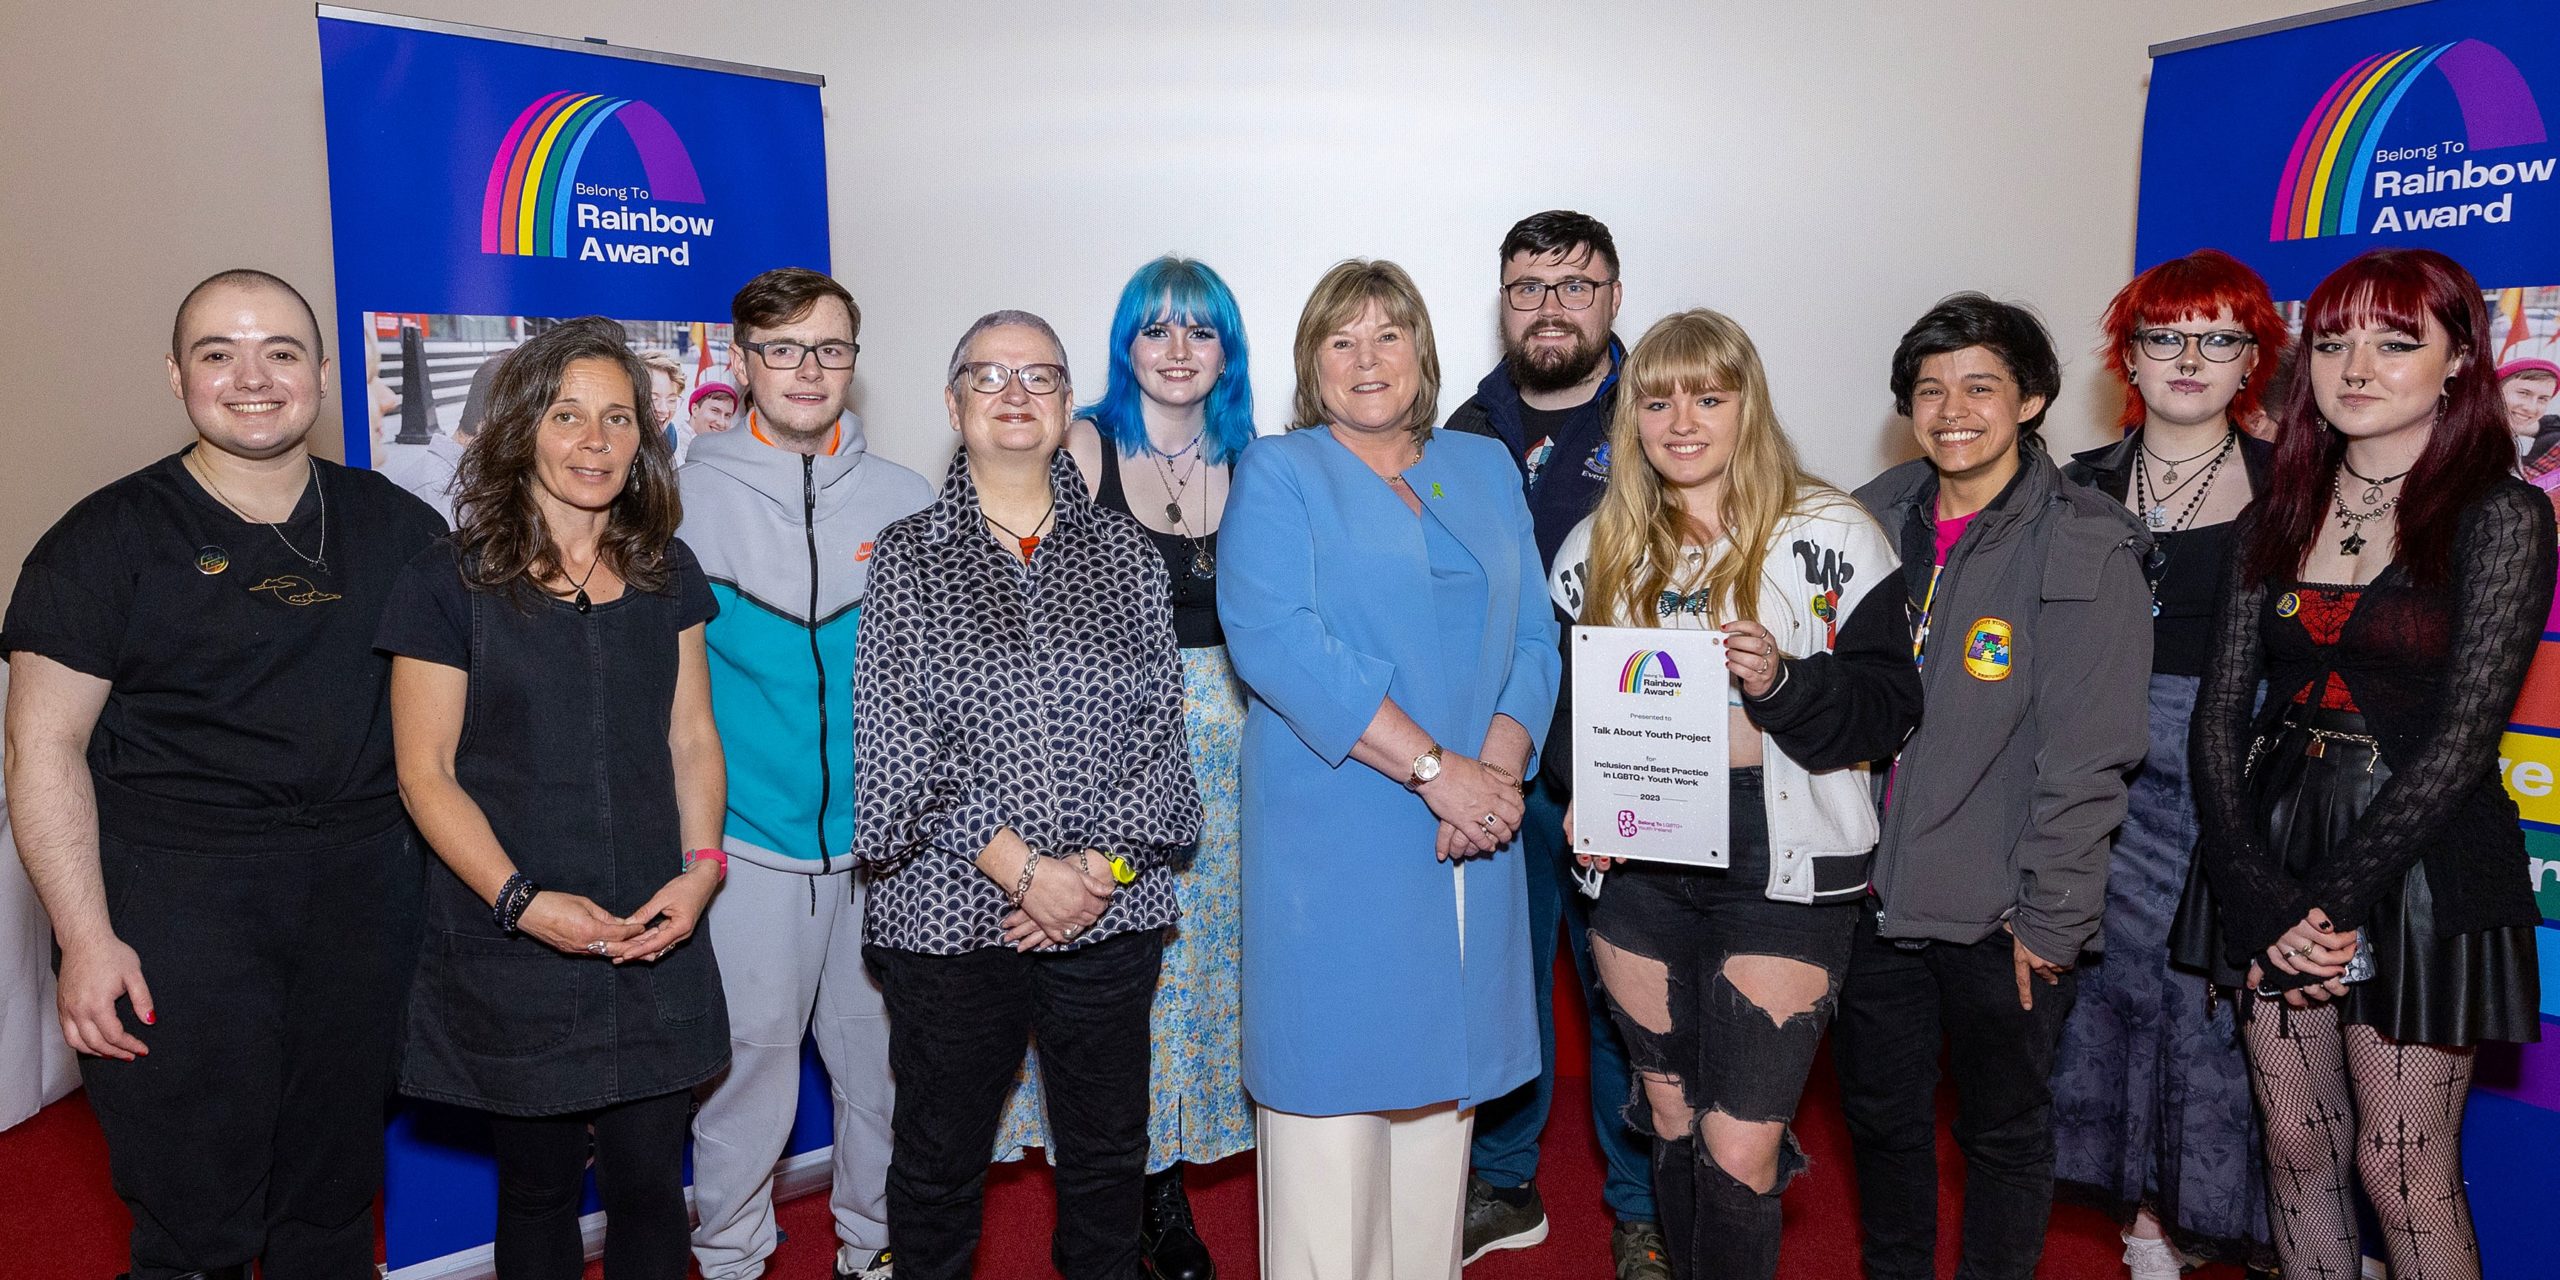 Belong To launches new accreditation award for LGBTQ+ inclusive youth ...